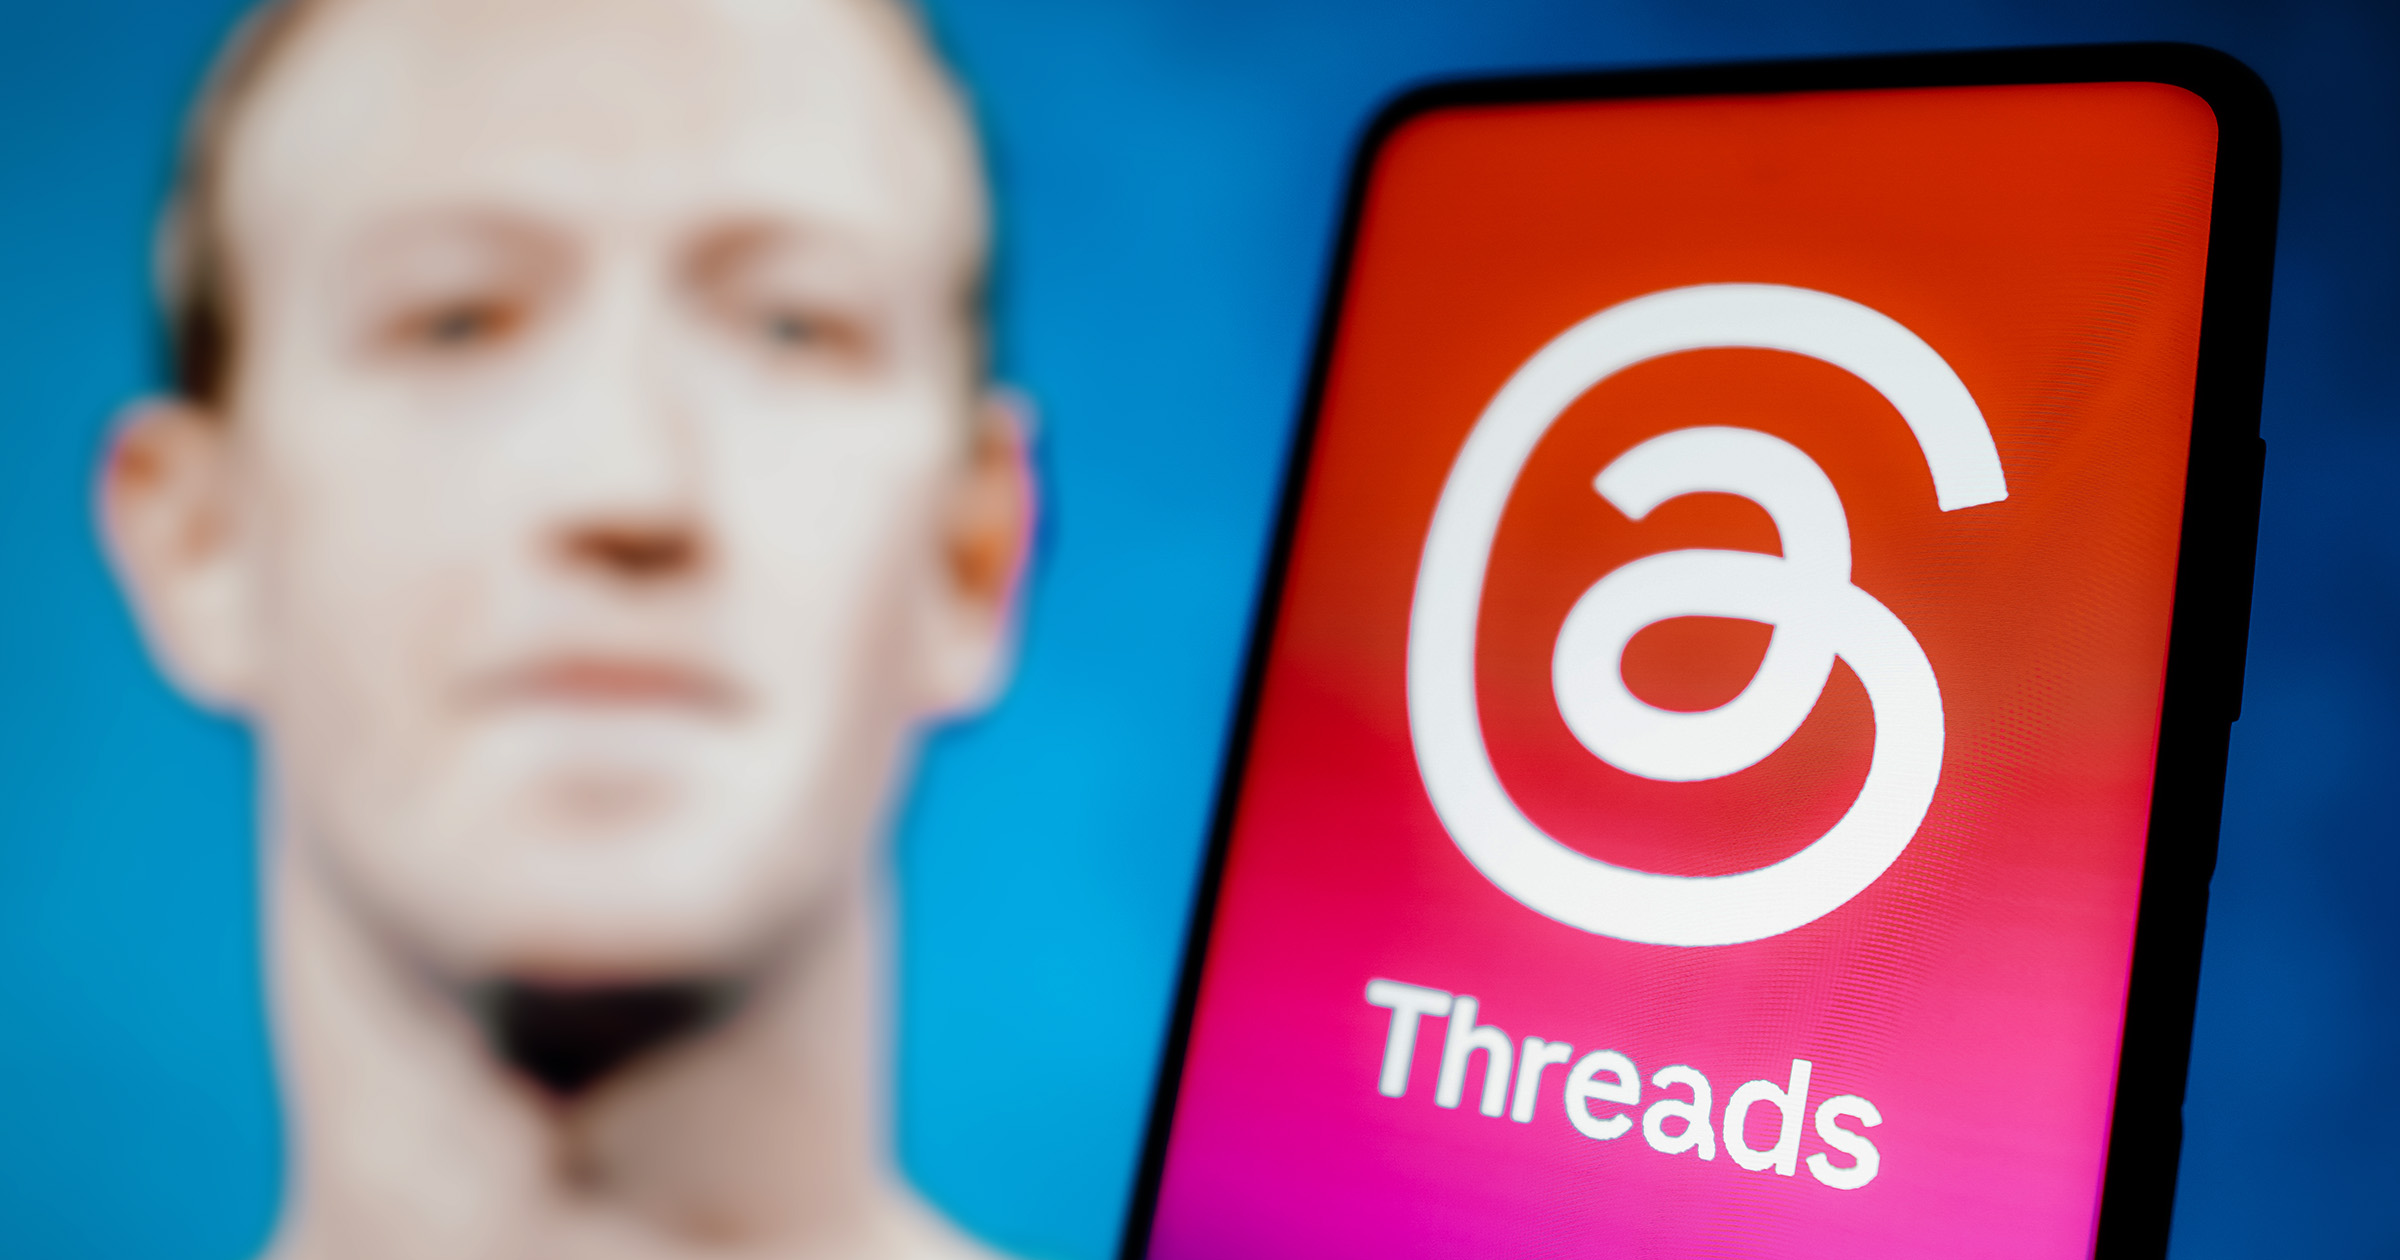 The fastest flop in history? Data shows that Threads’ popularity crashed in just one week